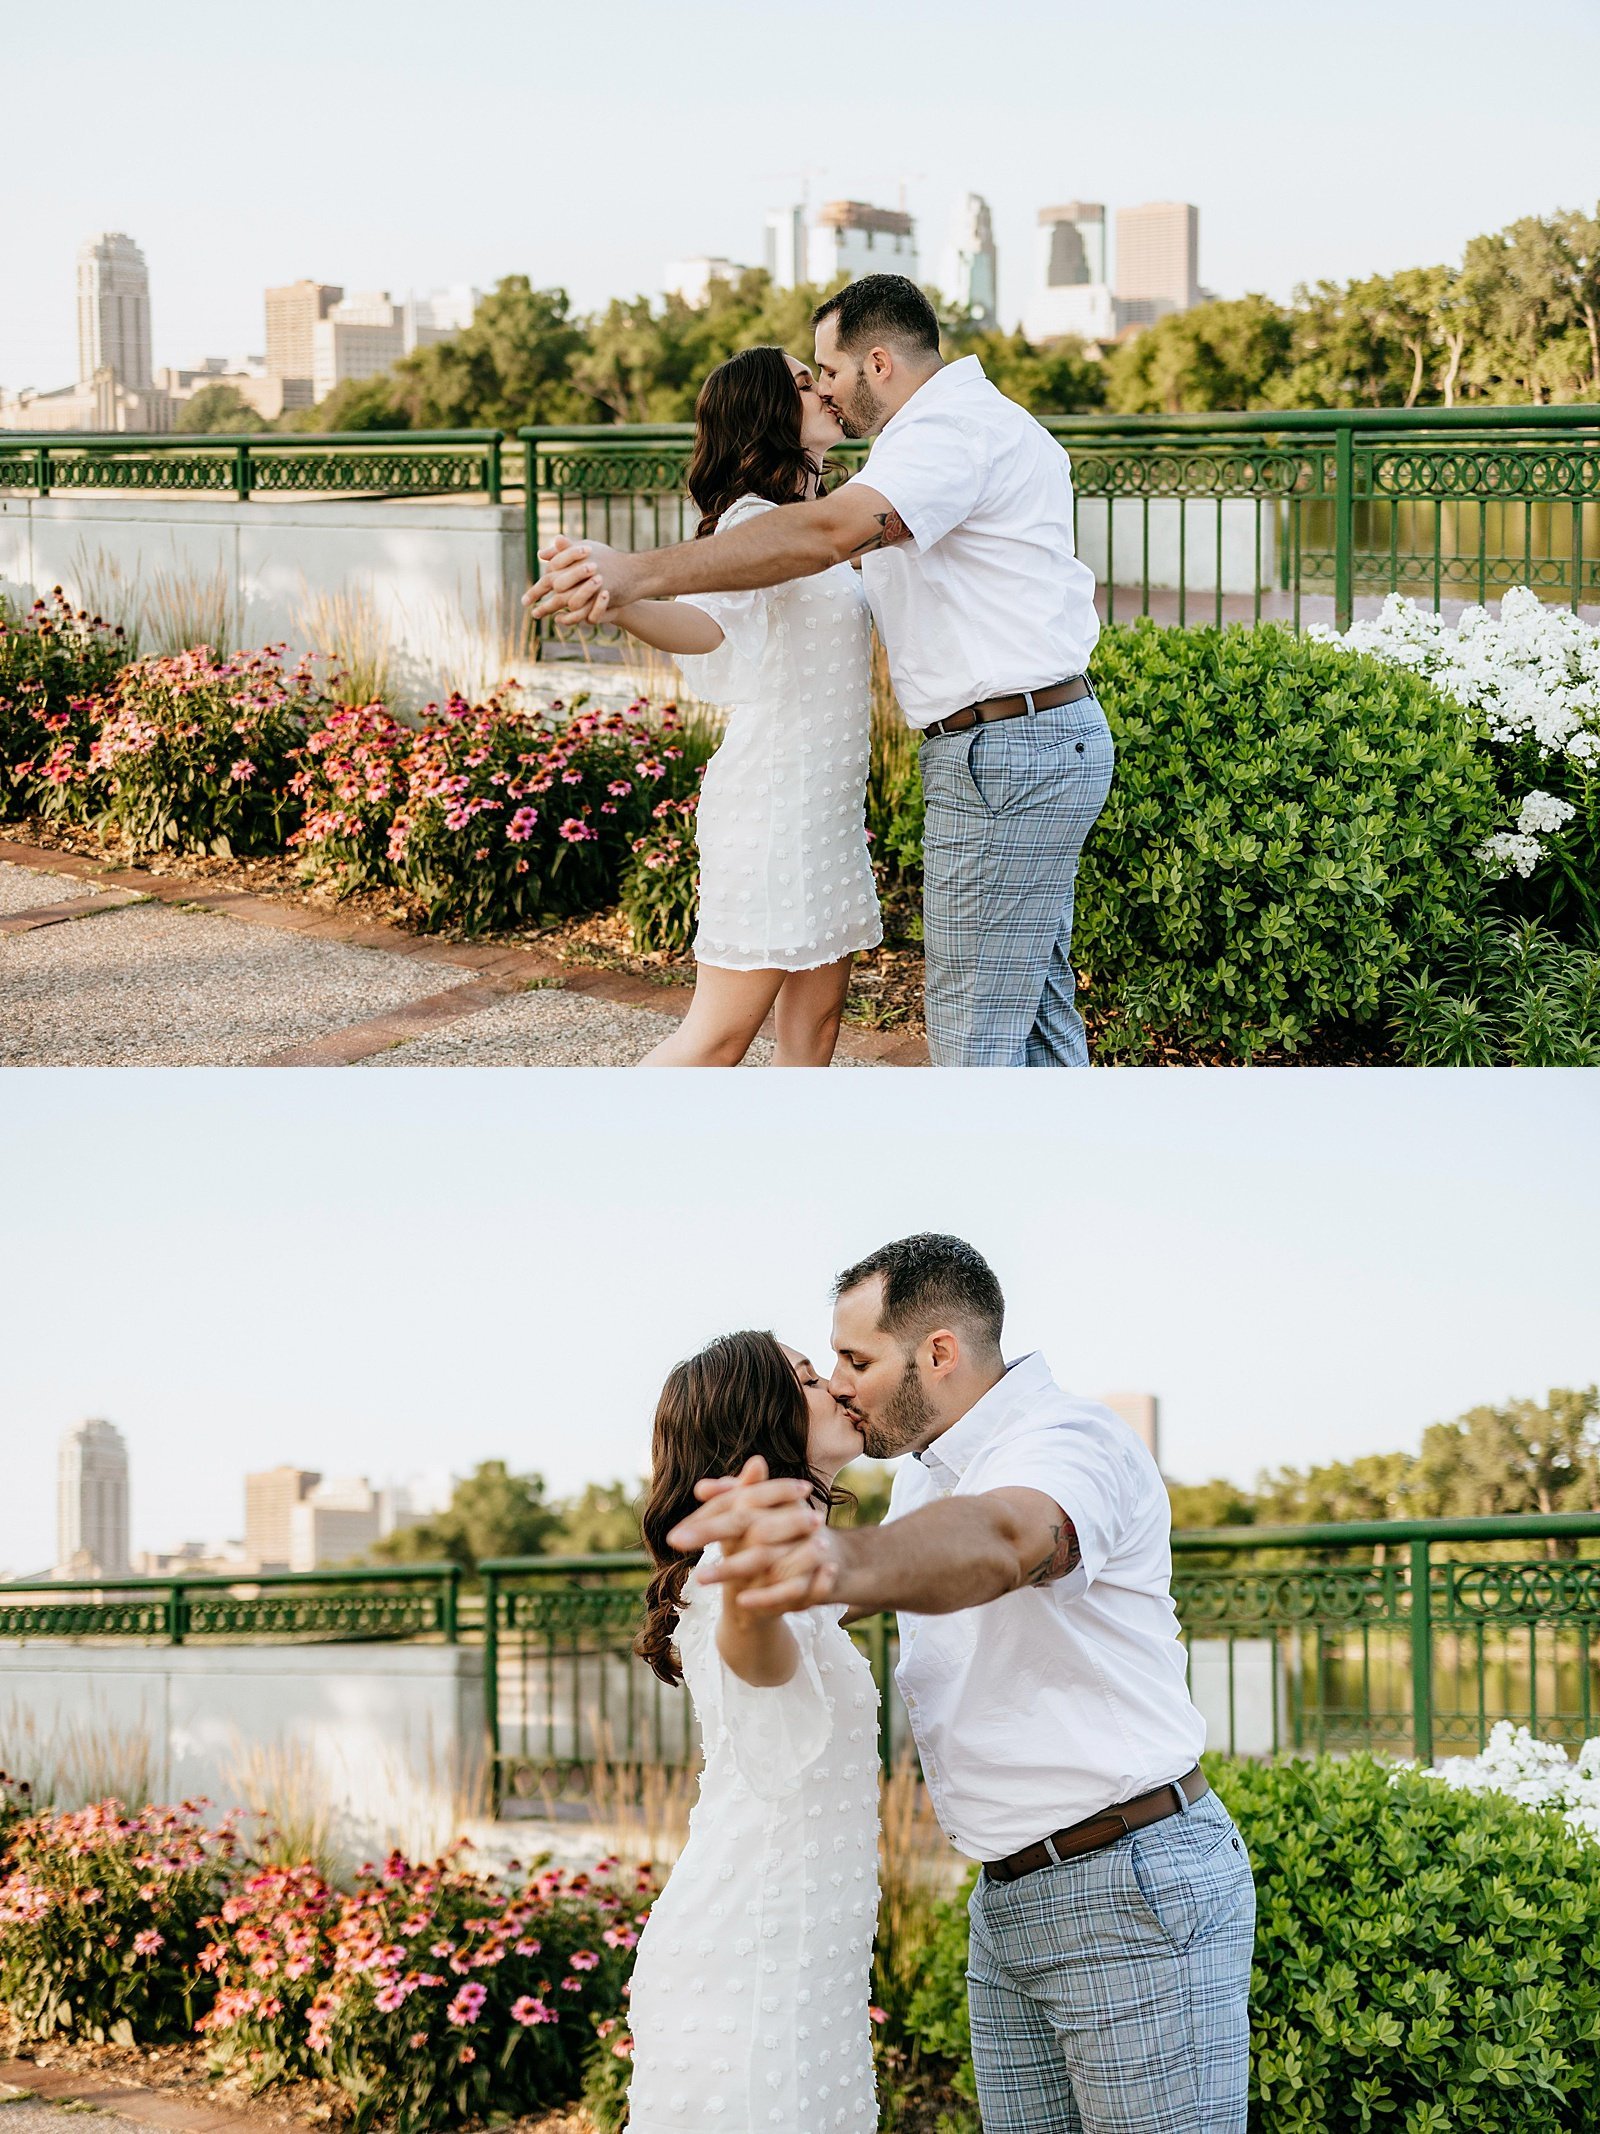  Engaged couple kissing and holding hands for portraits by Minneapolis Wedding Photographer, McKenzie Berquam.  